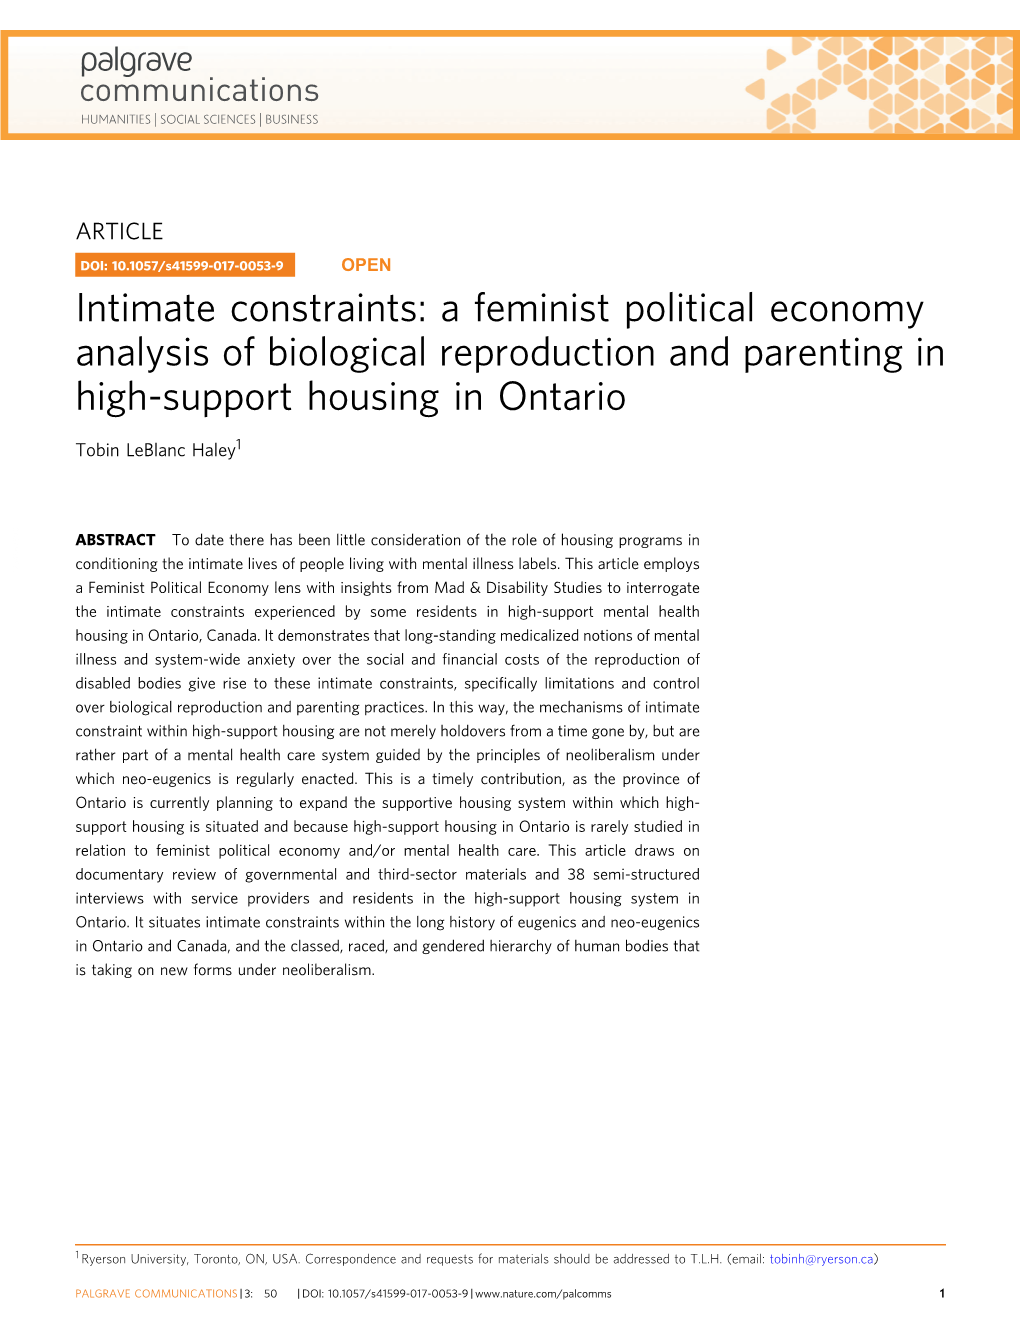 A Feminist Political Economy Analysis of Biological Reproduction and Parenting in High-Support Housing in Ontario